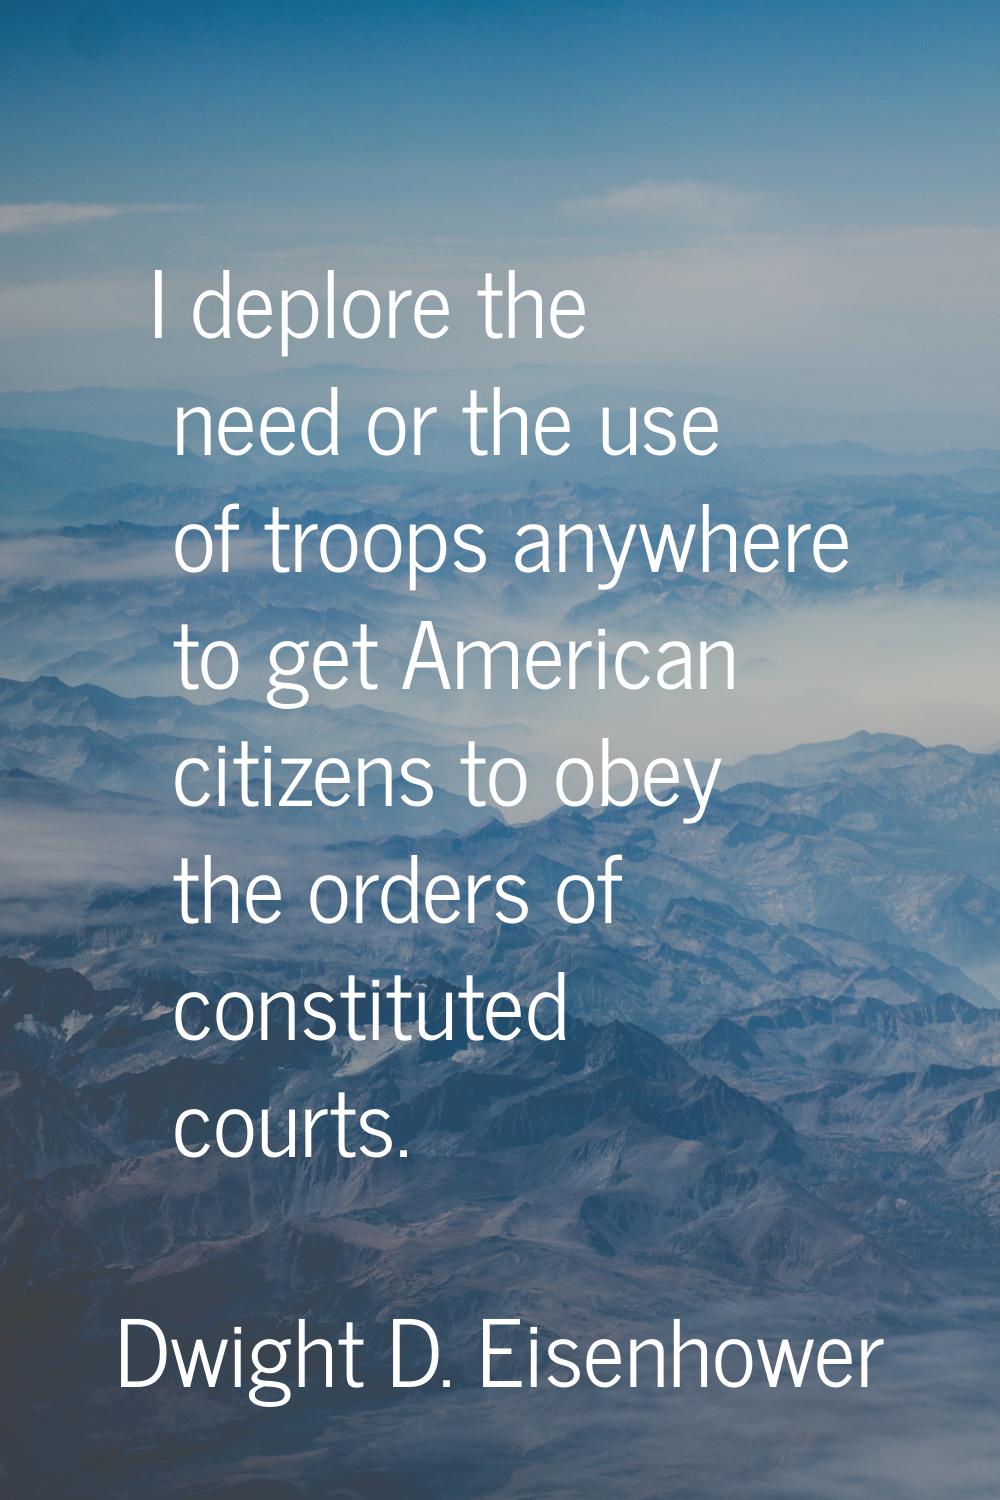 I deplore the need or the use of troops anywhere to get American citizens to obey the orders of con